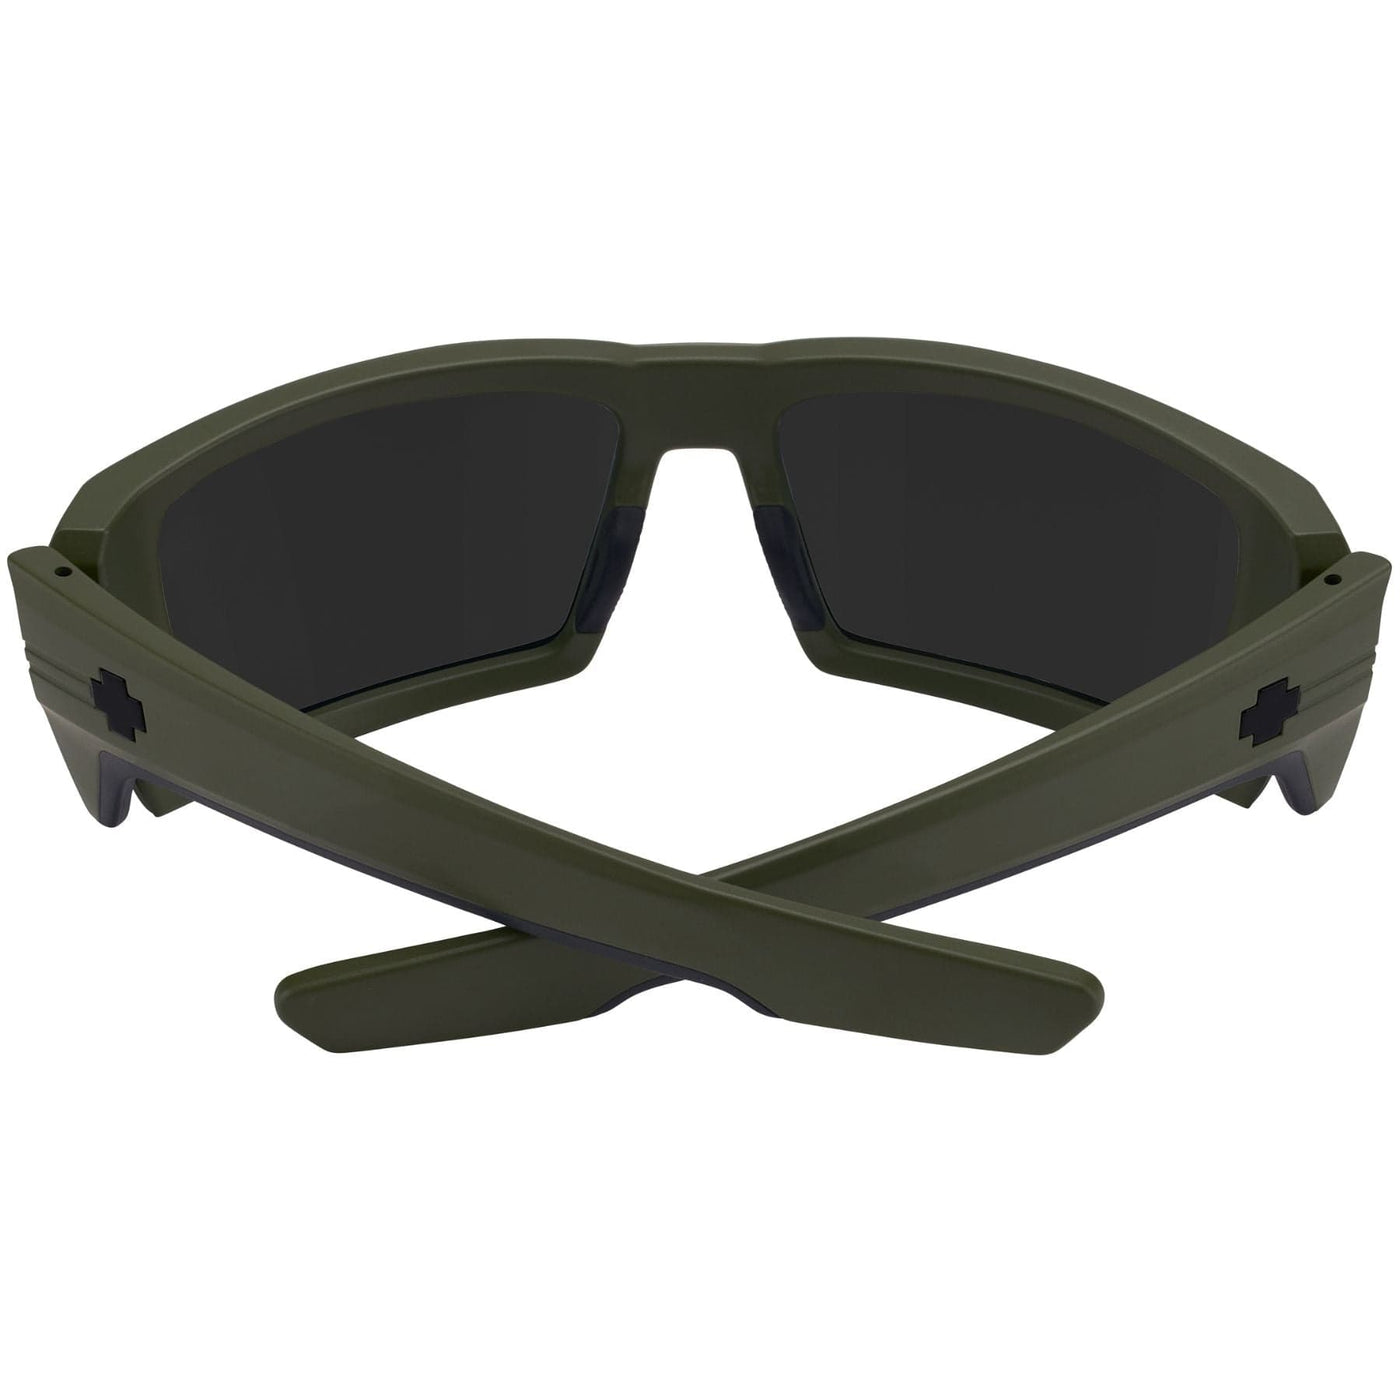 SPY REBAR ANSI Sunglasses, Happy Lens - Gray/Army Green 8Lines Shop - Fast Shipping